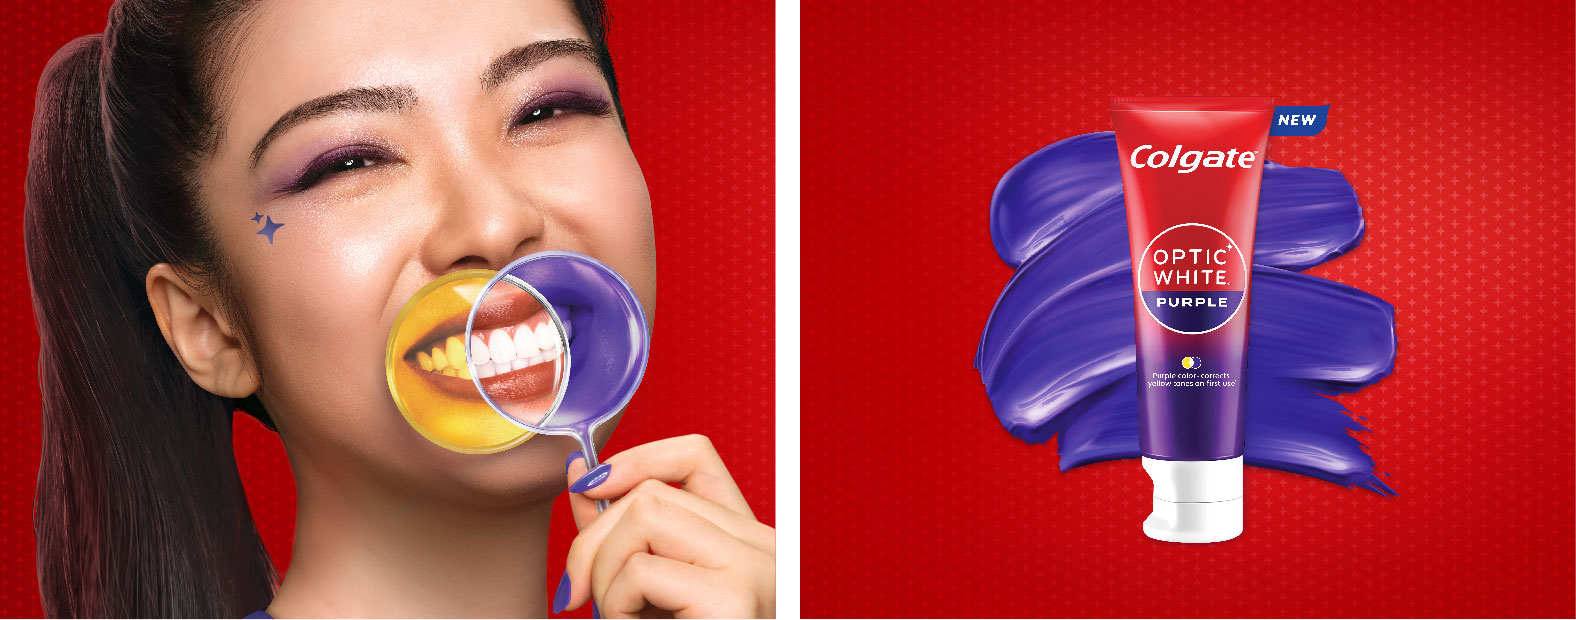 Colgate unveils its first-ever Purple Toothpaste: Colgate Optic White Purple